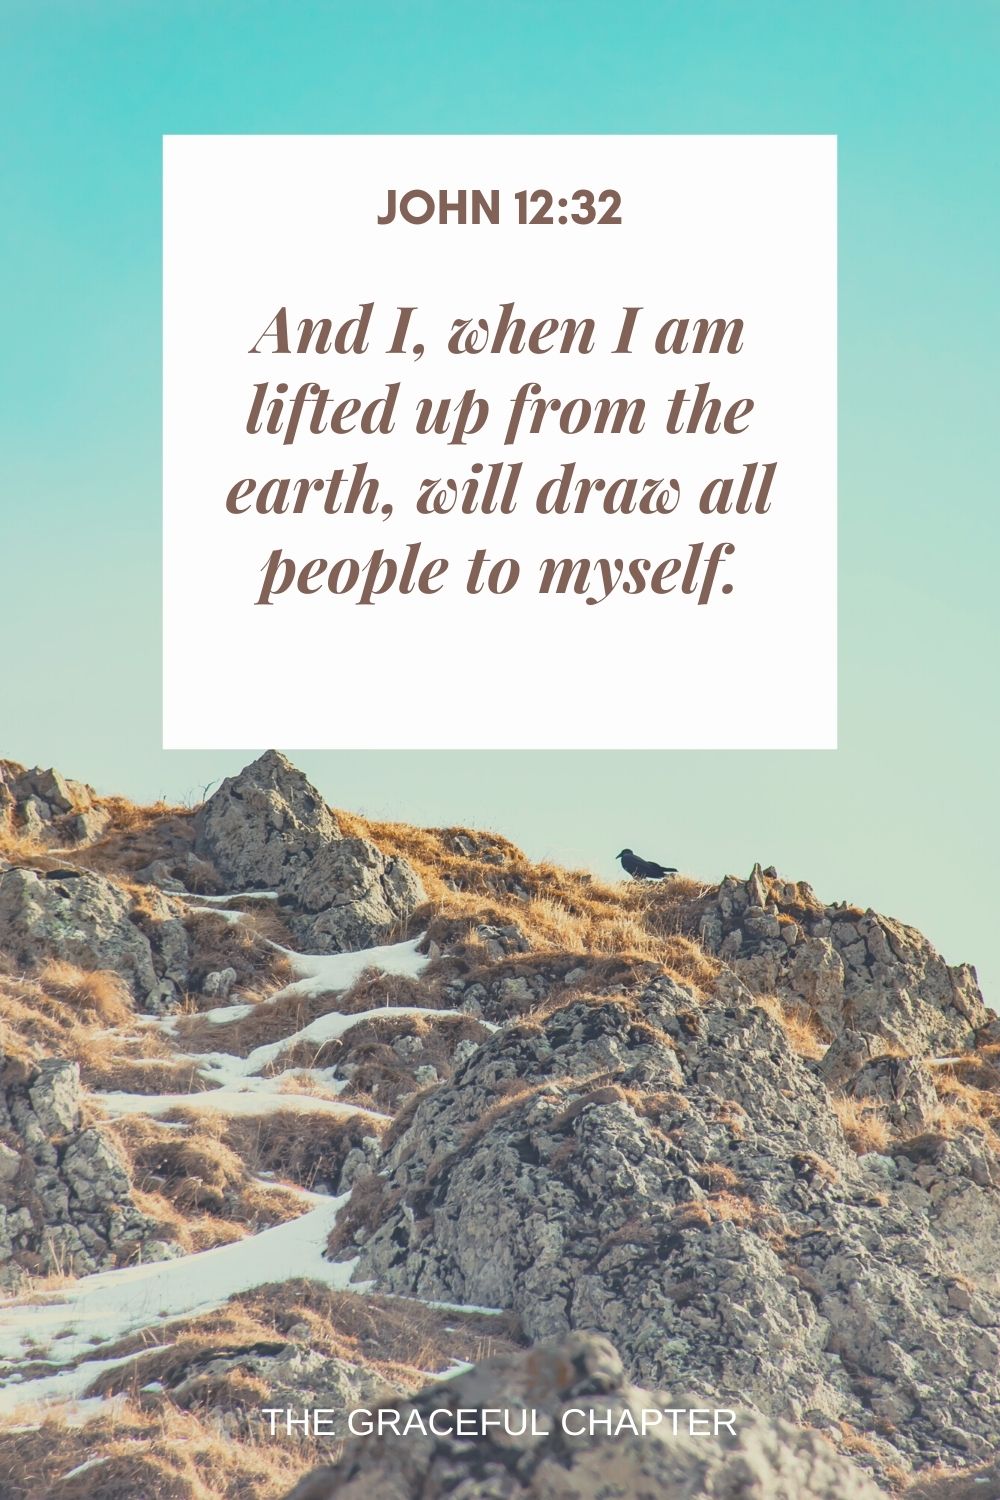 And I, when I am lifted up from the earth, will draw all people to myself. John 12:32